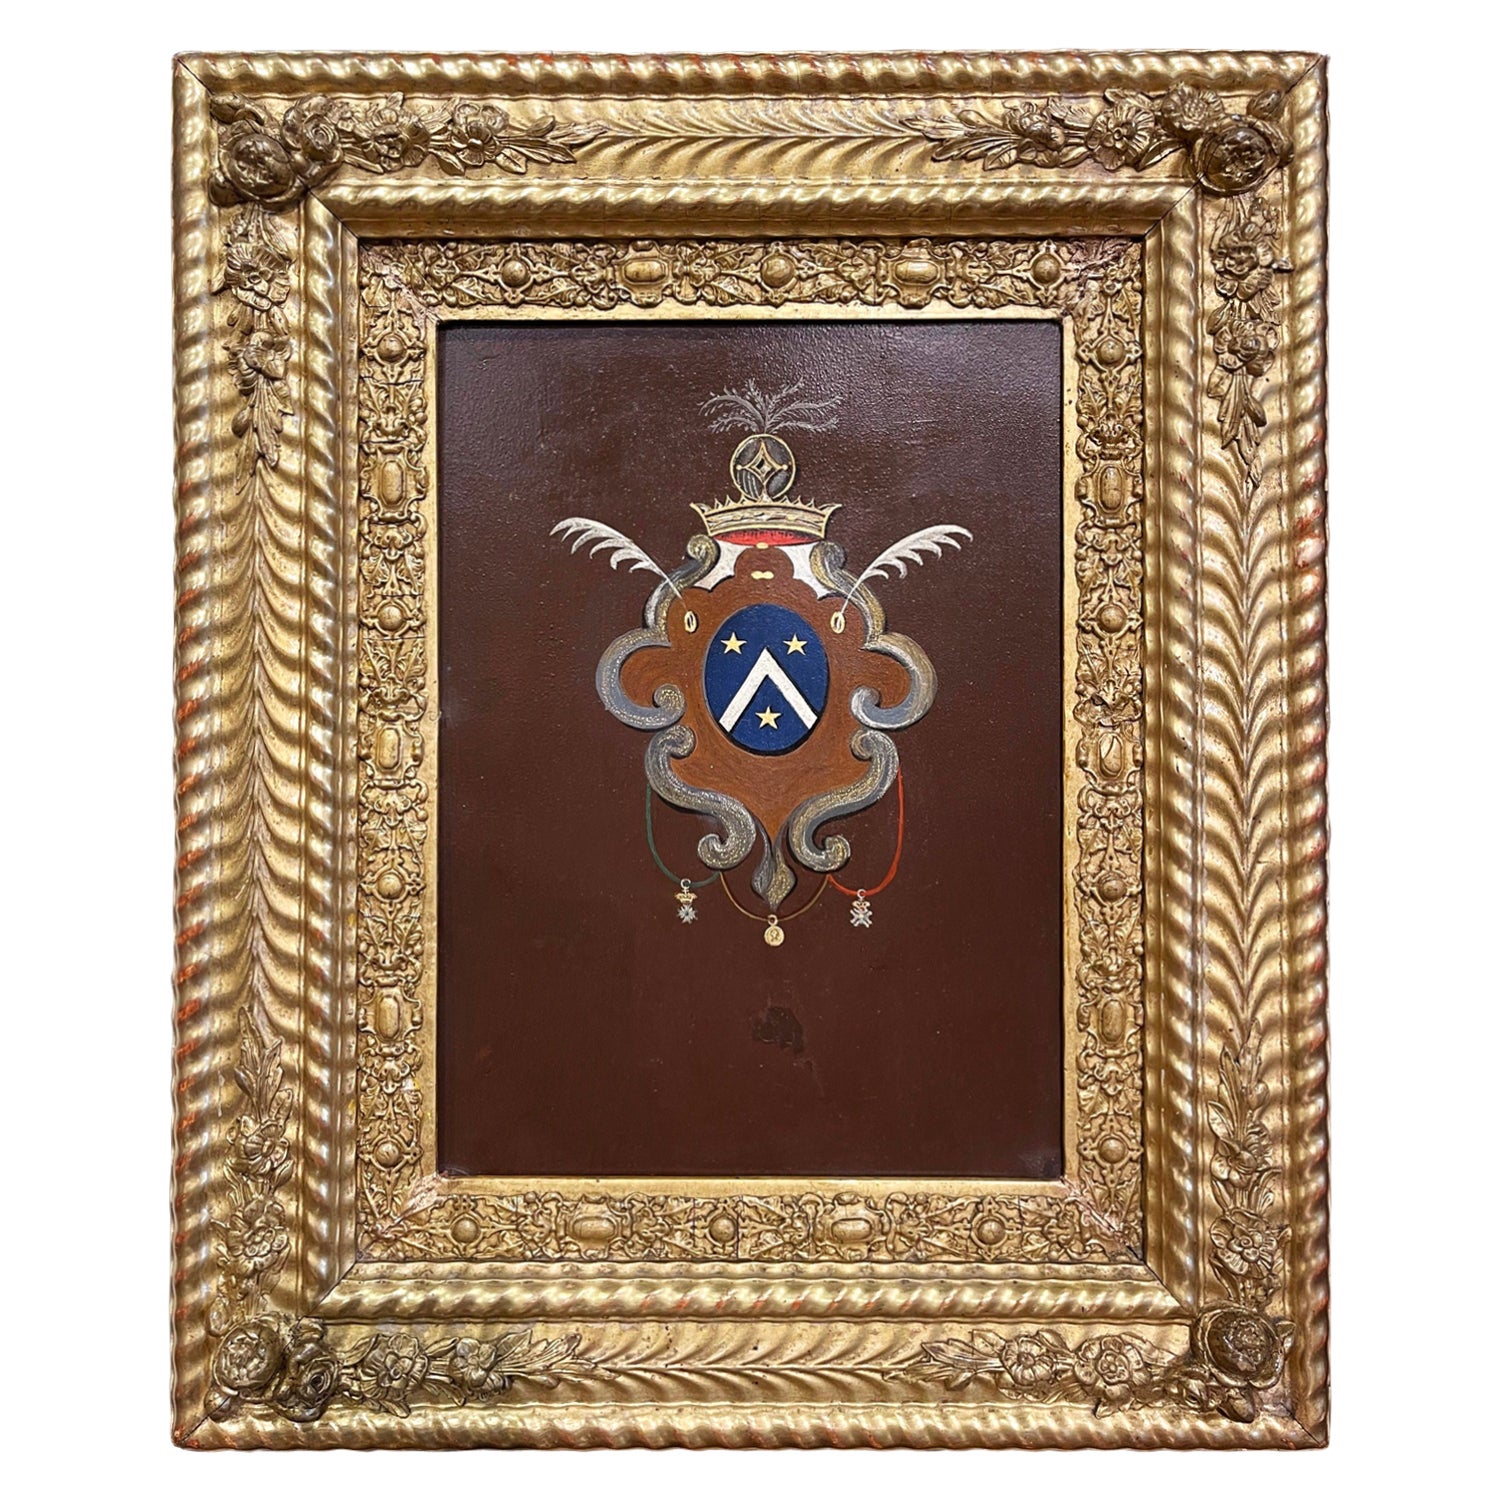 Early 19th Century French Hand Painted Crest on Metal in Carved Gilt Frame